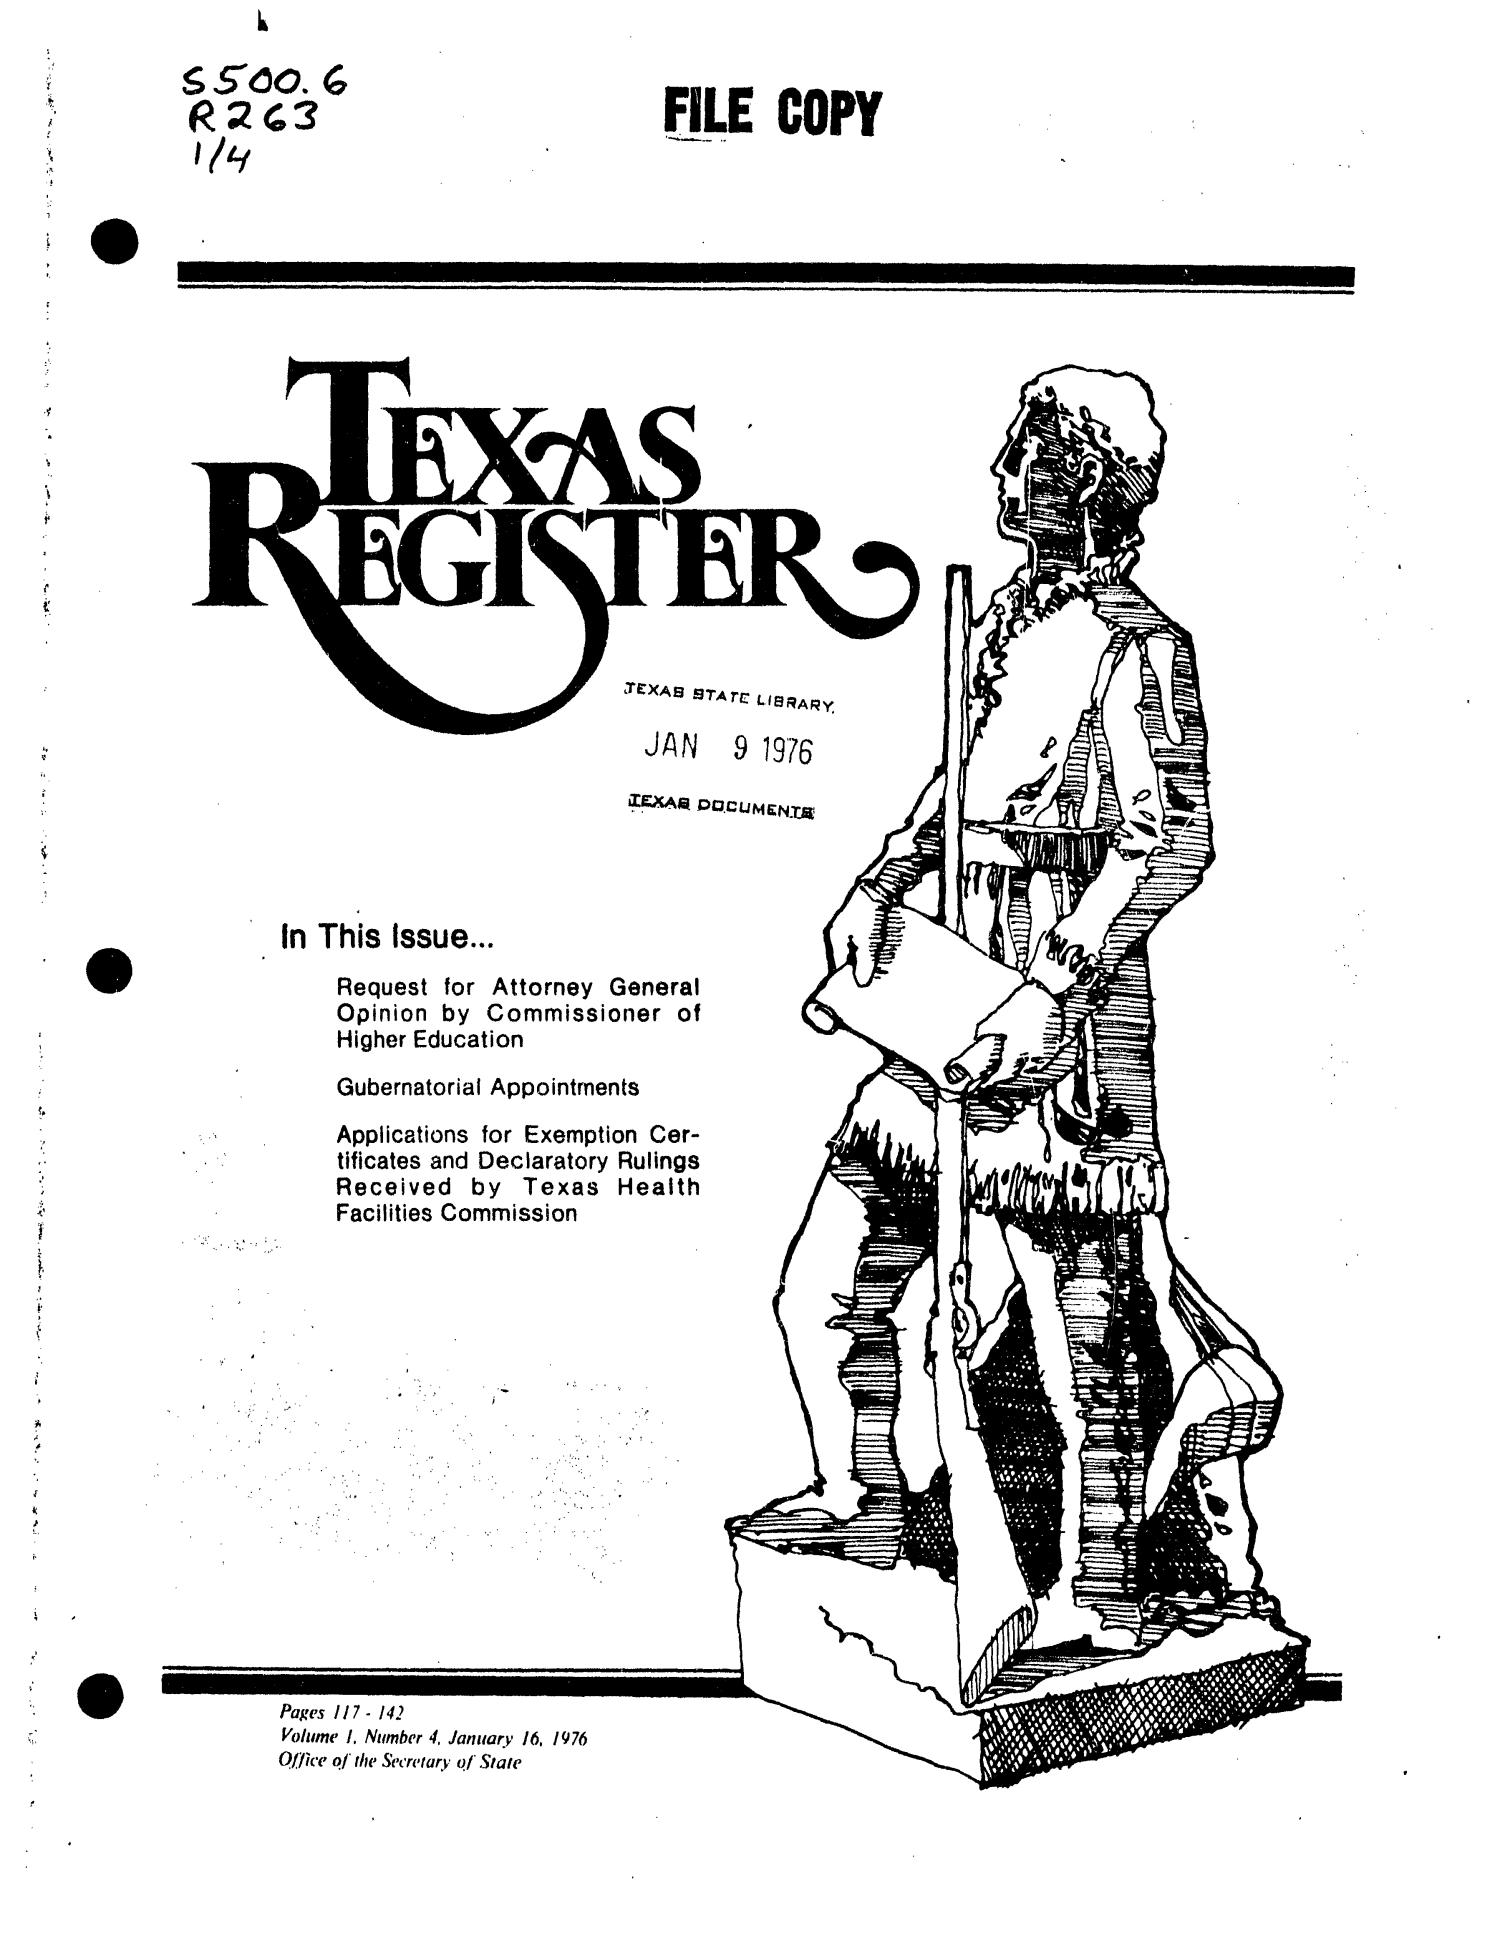 Texas Register, Volume 1, Number 4, Pages 117-142, January 16, 1976
                                                
                                                    Title Page
                                                